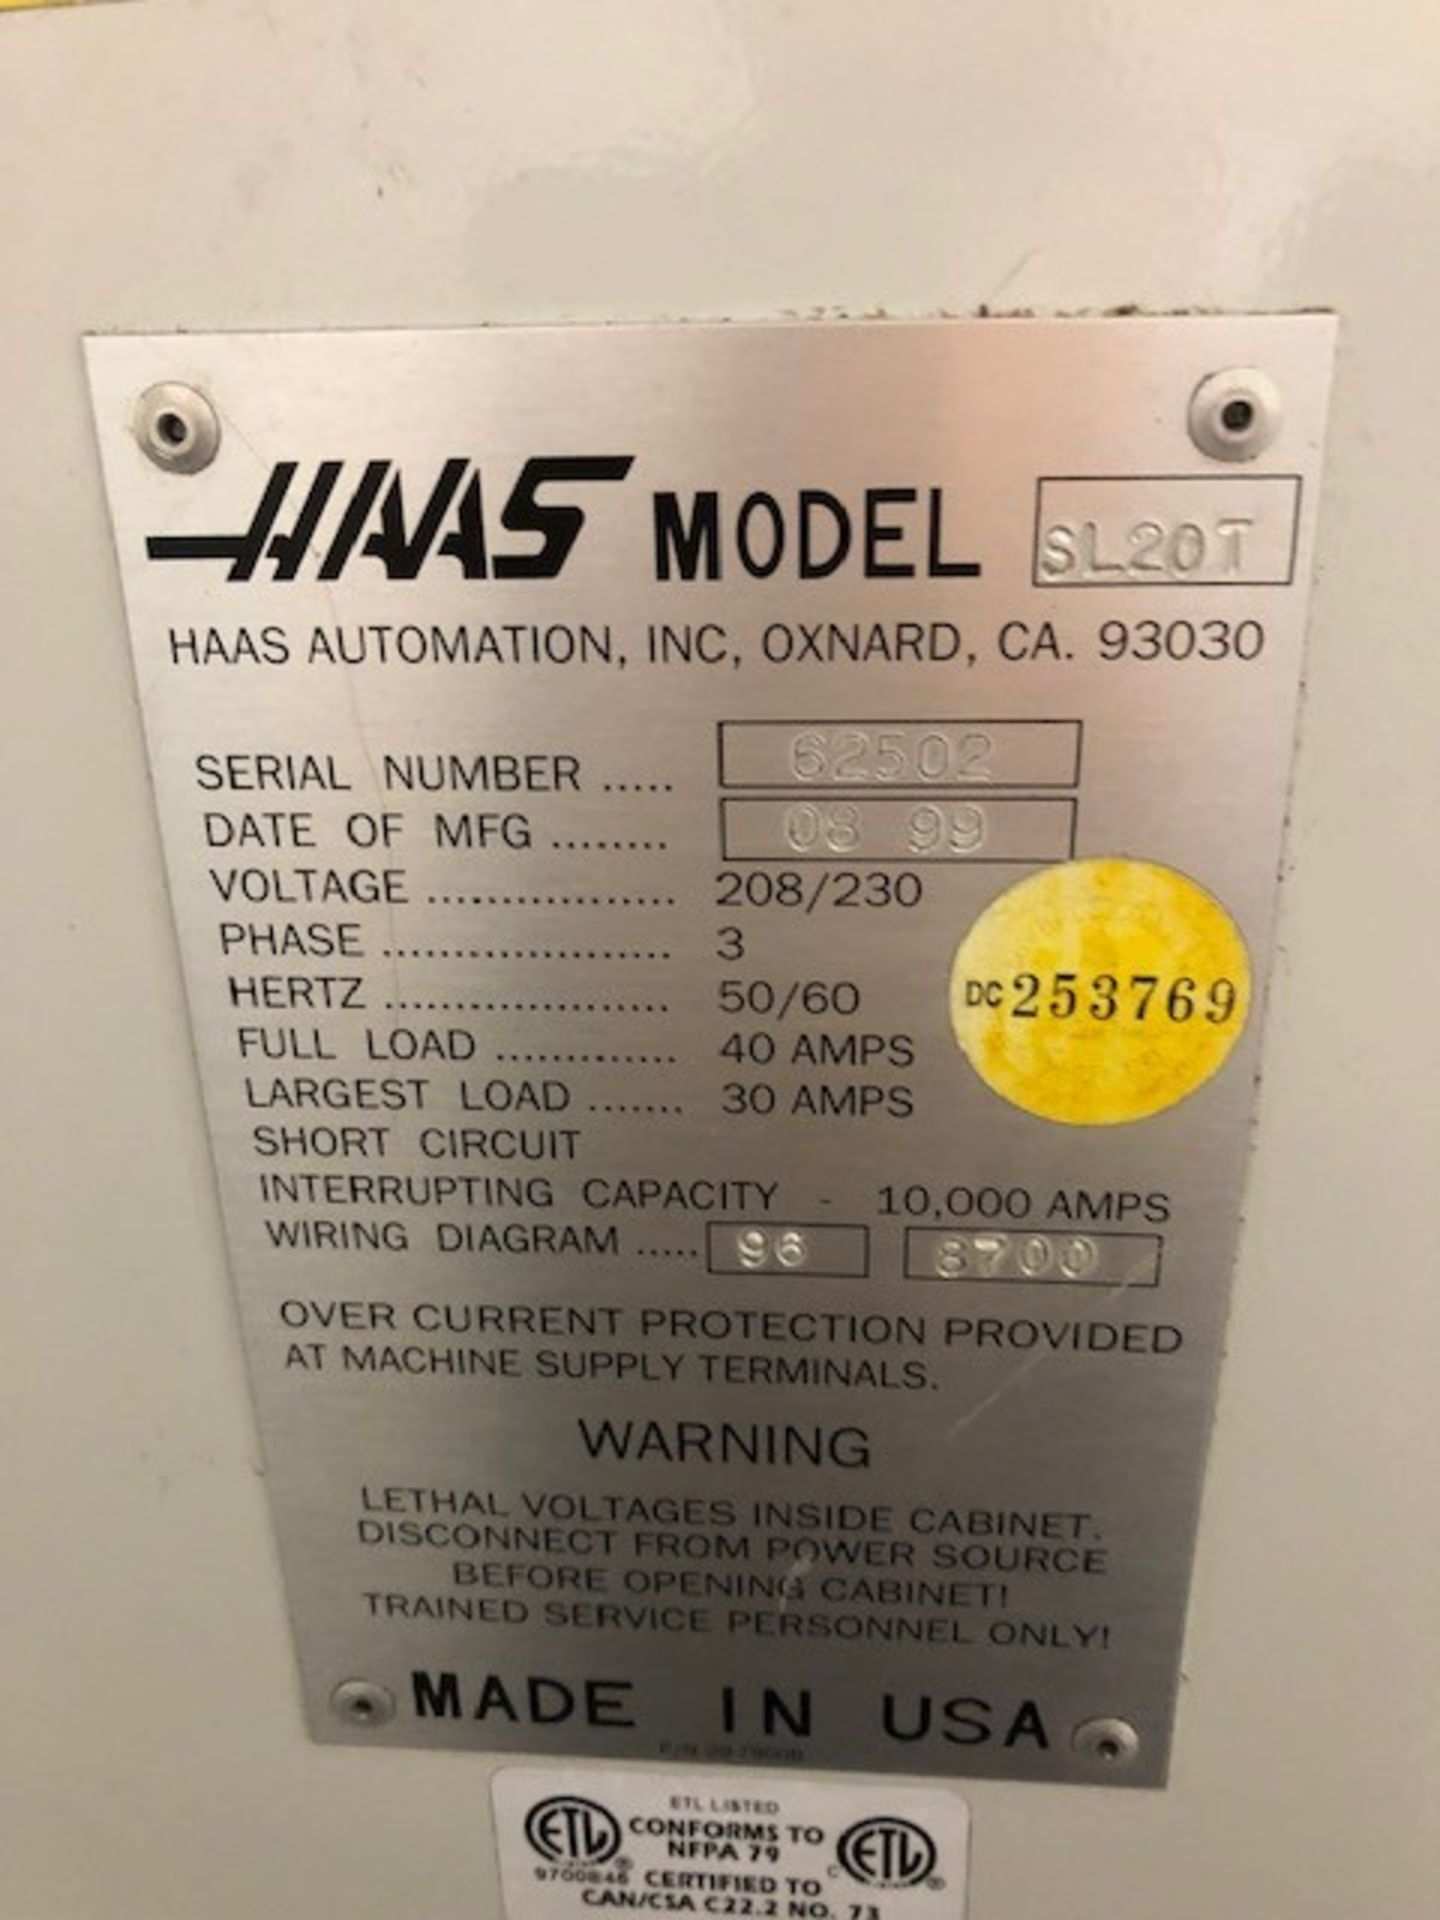 HAAS MODEL SL-20T CNC TURNING CENTER; S/N 62502, 8" 3-JAW CHUCK, TAILSTOCK, 10-POSITION TURRET ( - Image 9 of 9